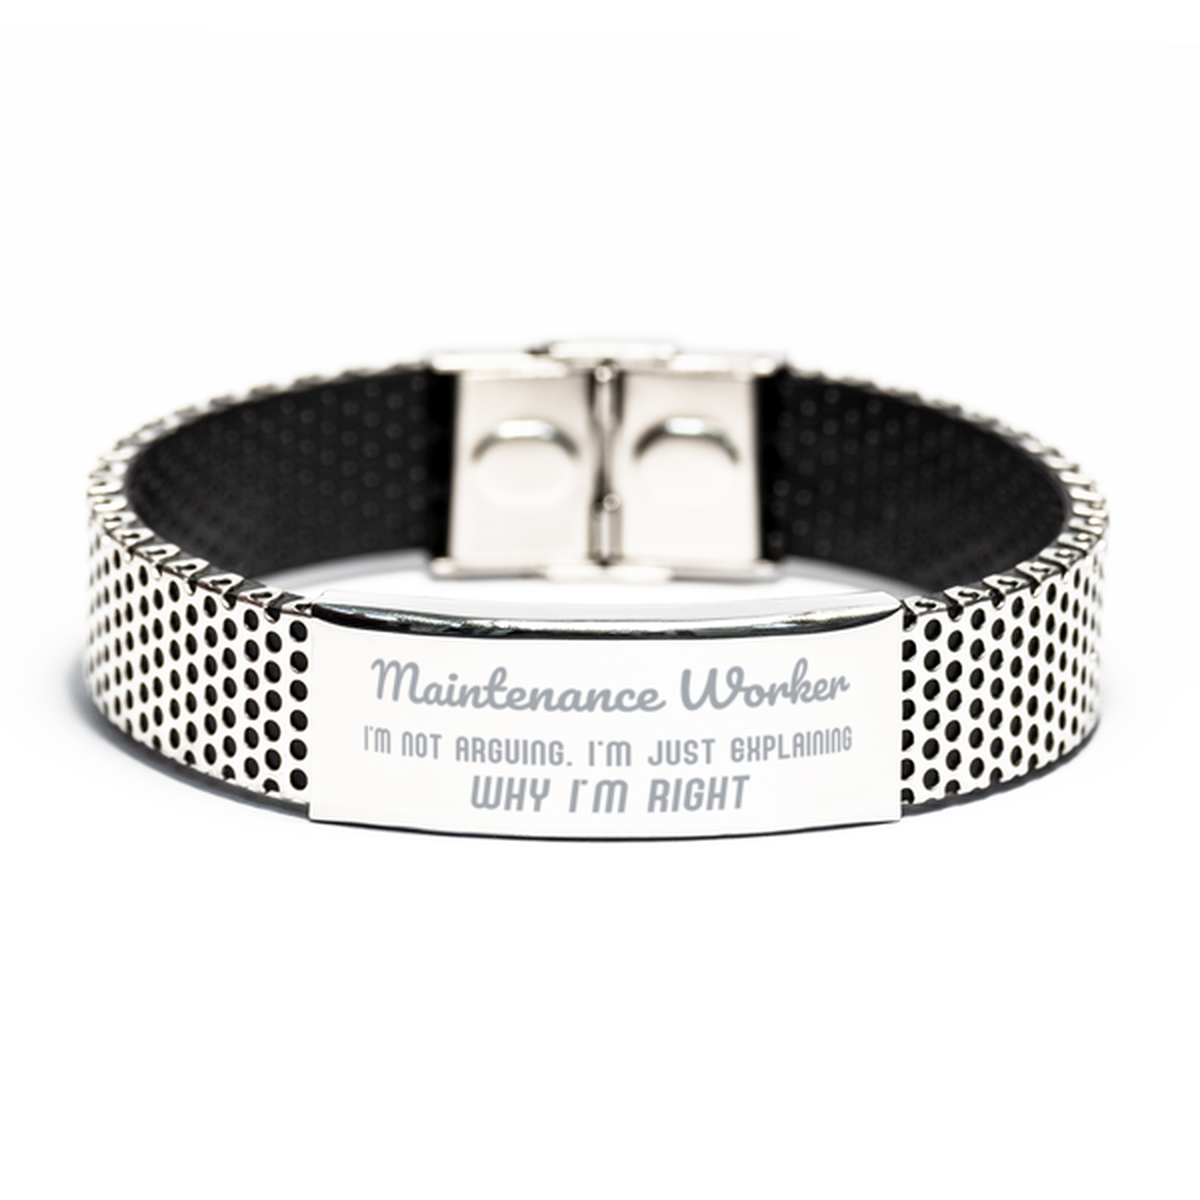 Maintenance Worker I'm not Arguing. I'm Just Explaining Why I'm RIGHT Stainless Steel Bracelet, Funny Saying Quote Maintenance Worker Gifts For Maintenance Worker Graduation Birthday Christmas Gifts for Men Women Coworker